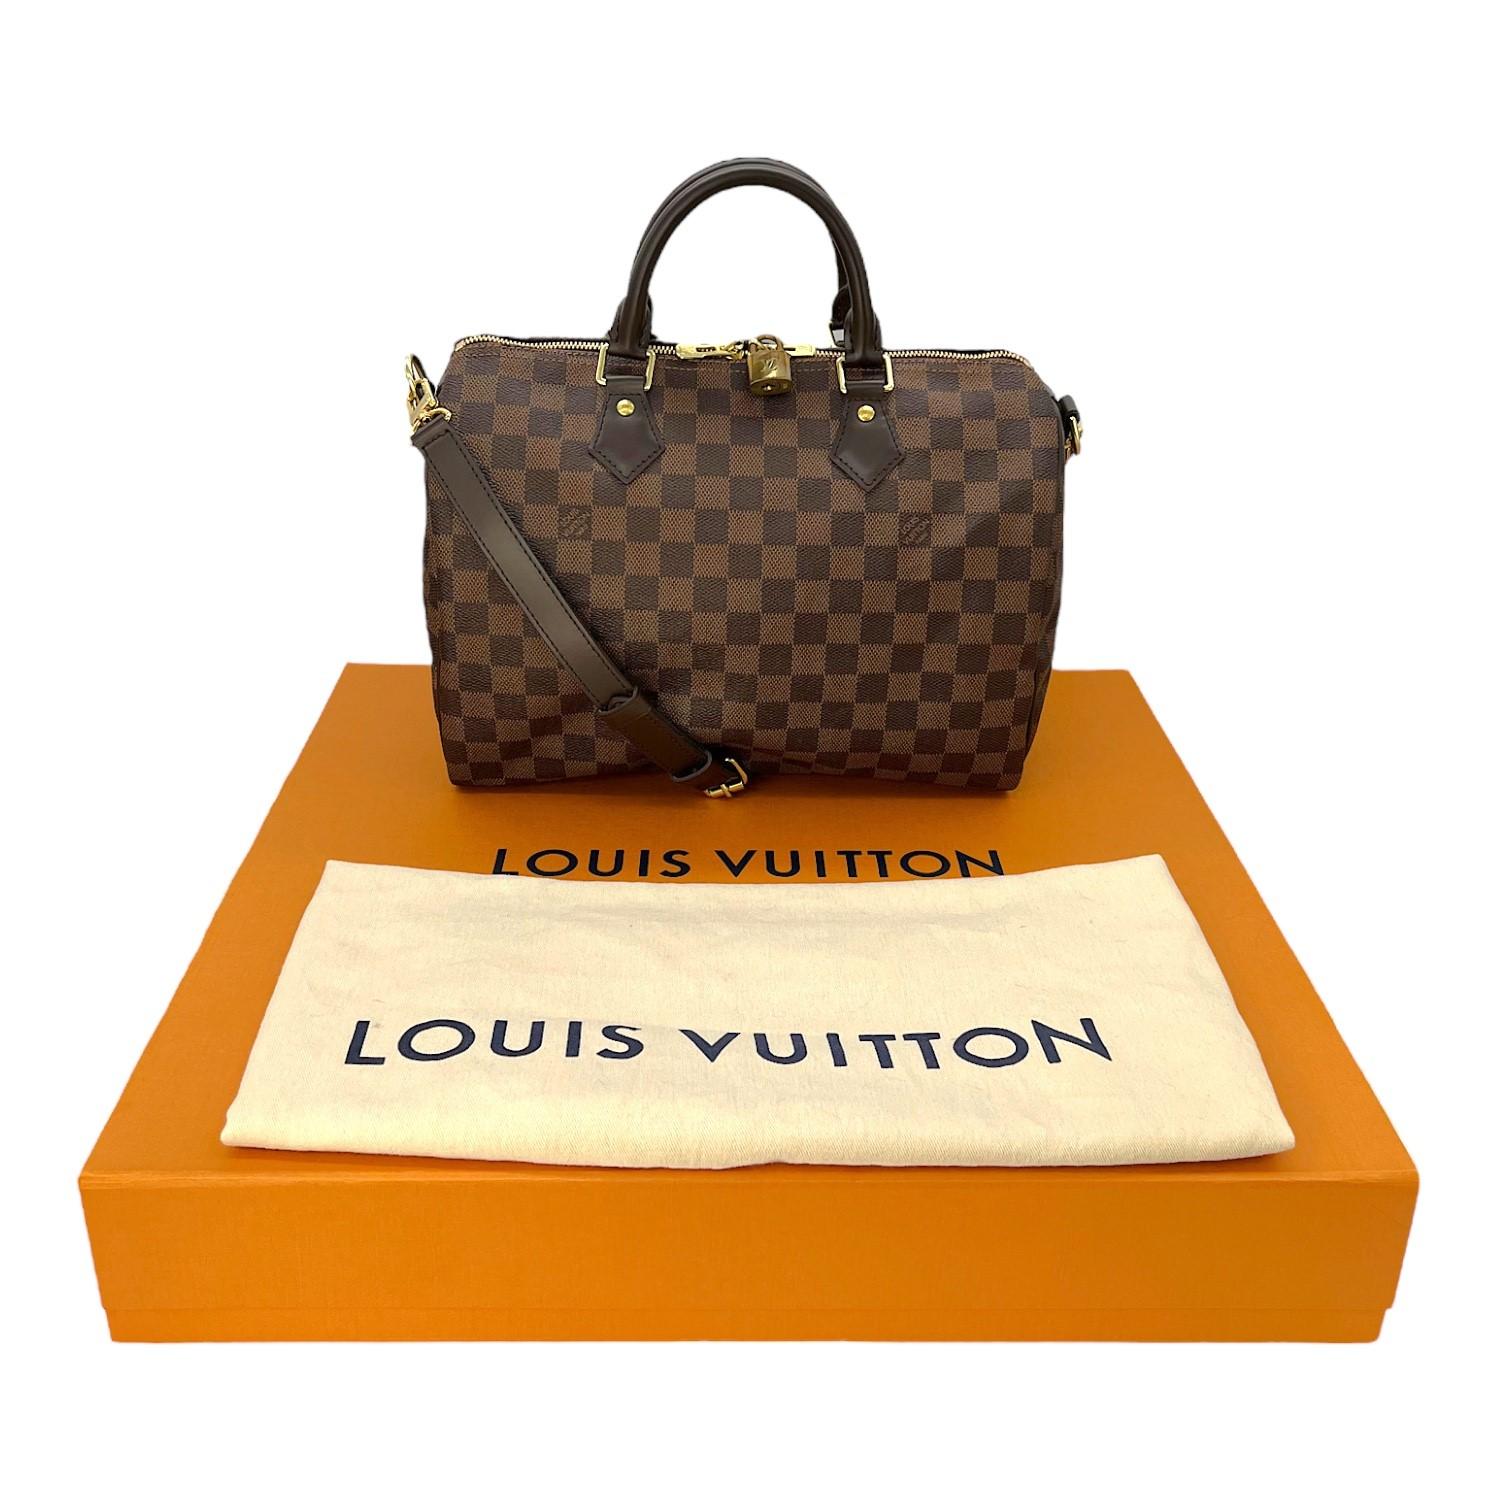 This Louis Vuitton Speedy Bandouliere 30 was made in the USA and it is finely crafted of the classic Louis Vuitton Damier Ebene coated canvas with leather trimming and gold-tone hardware features. It has dual rolled leather top handles and it has a